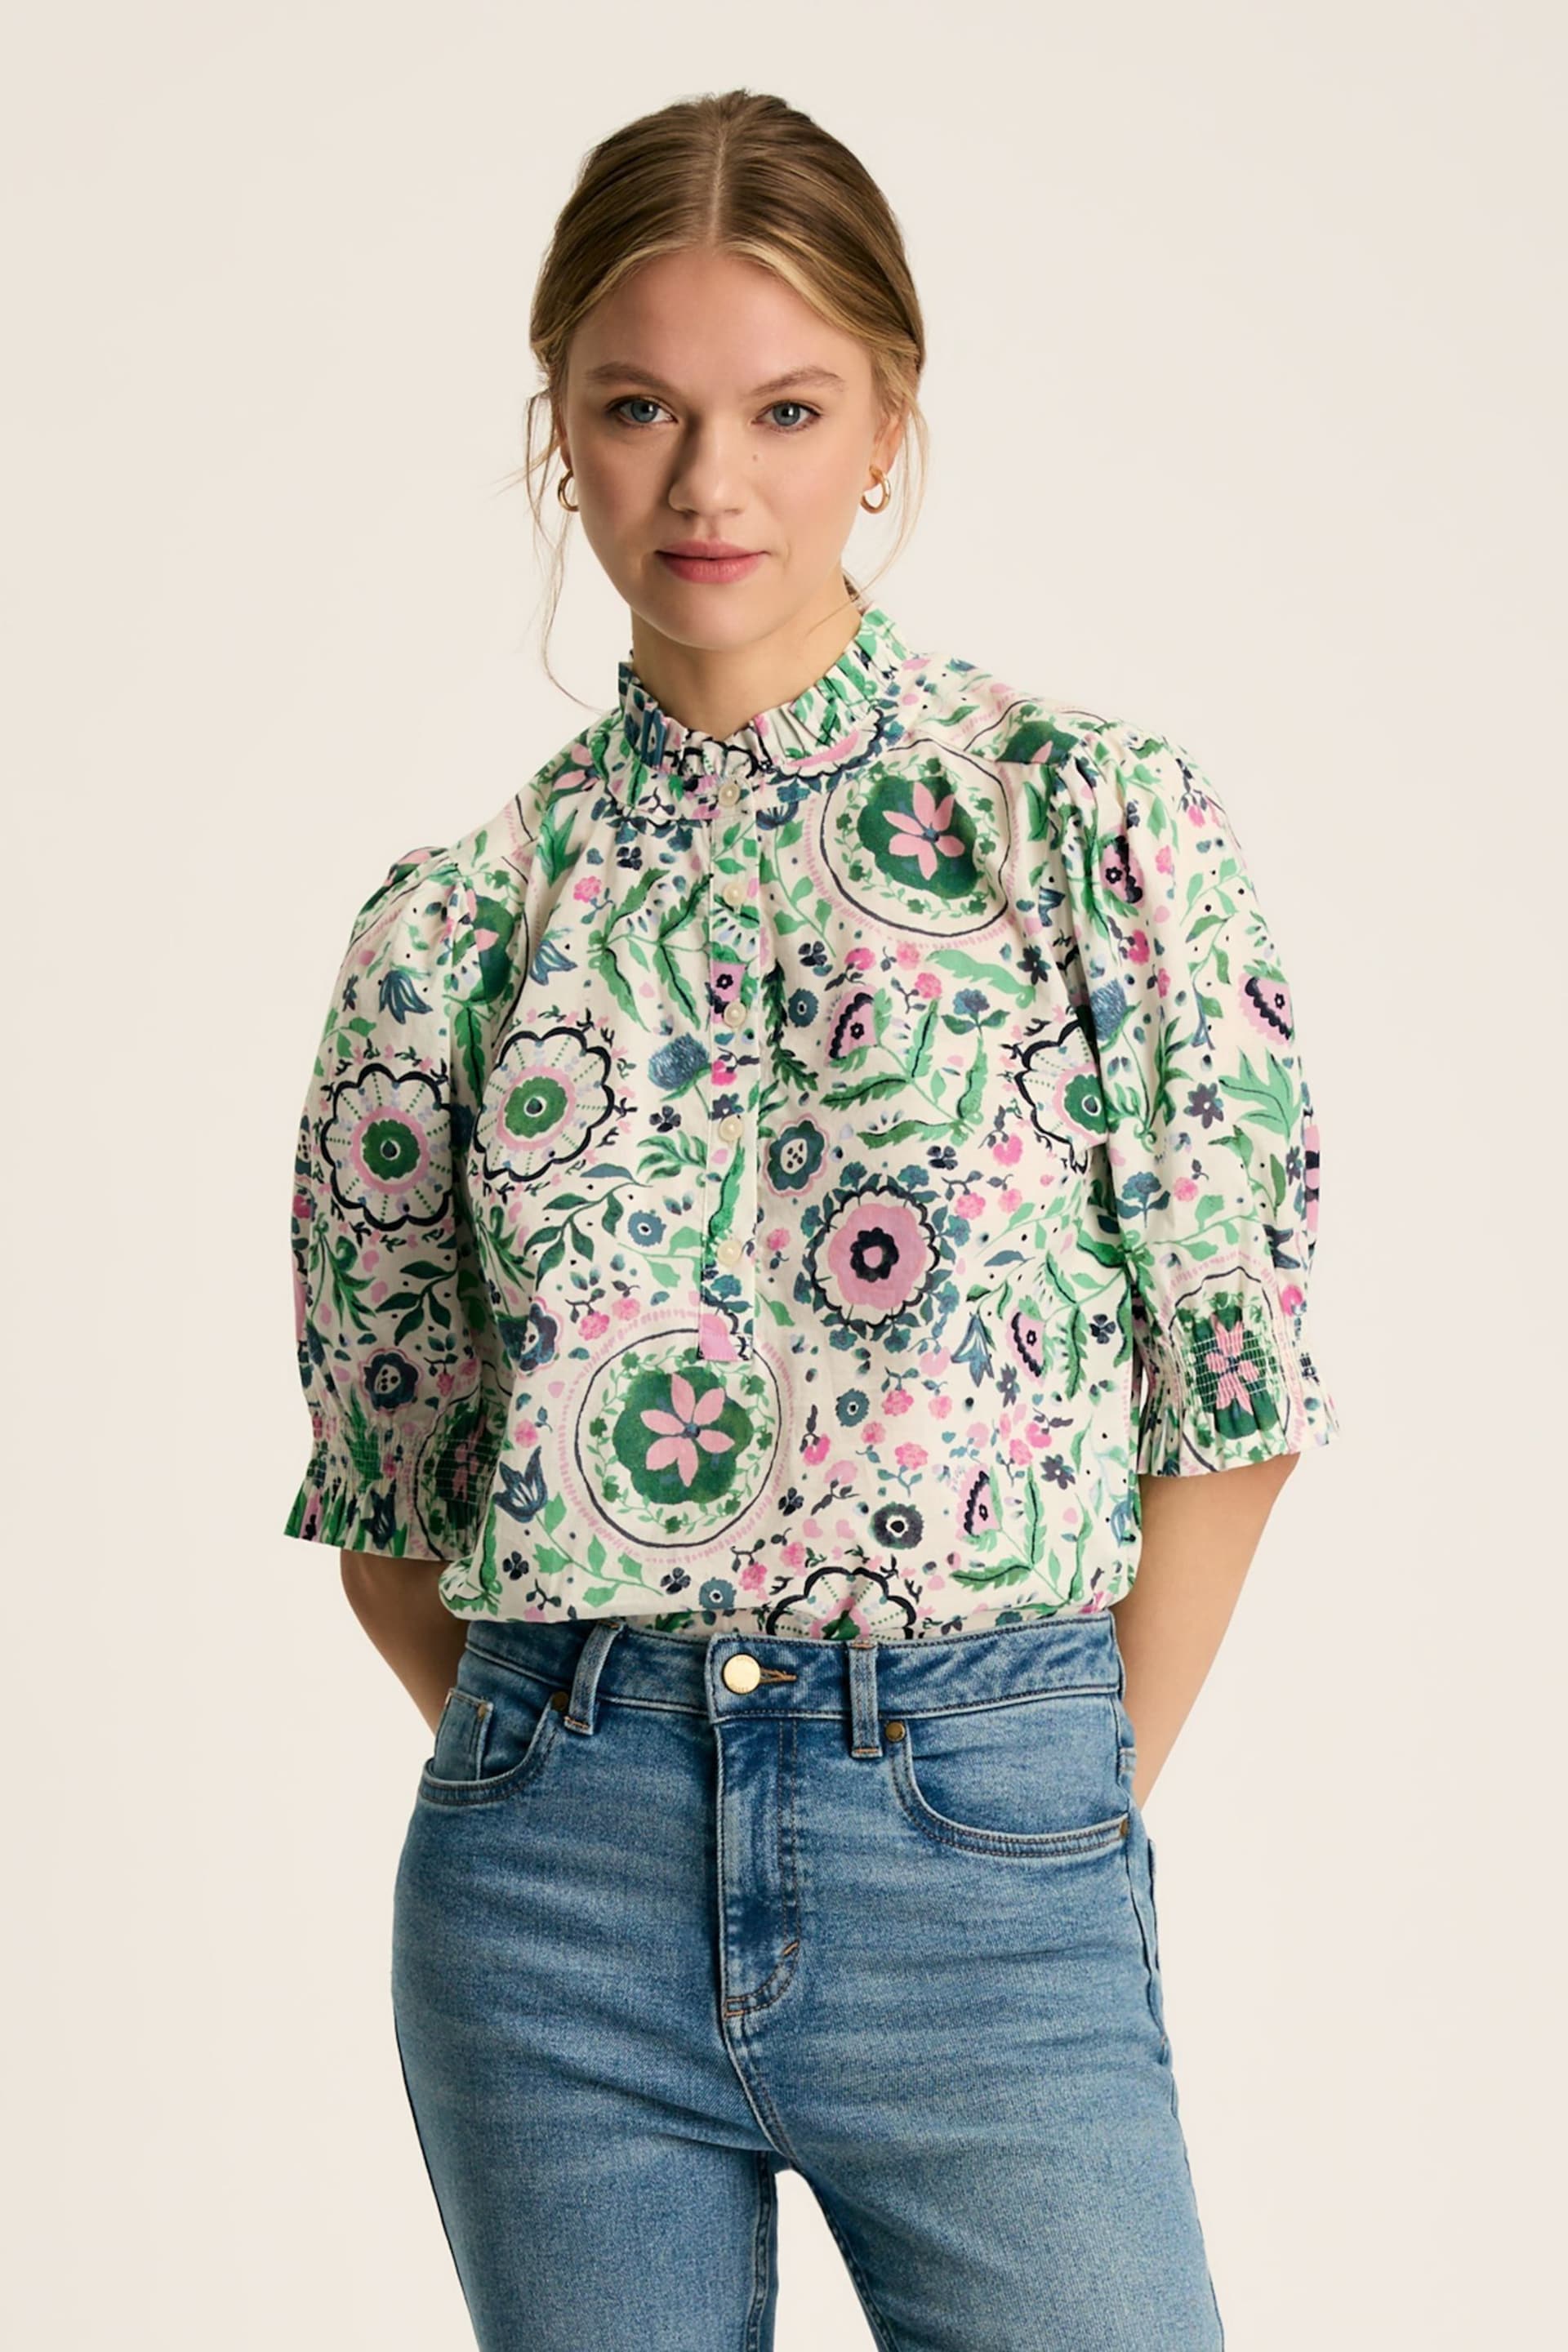 Joules Elle Green/Pink Frill Blouse - Image 1 of 8